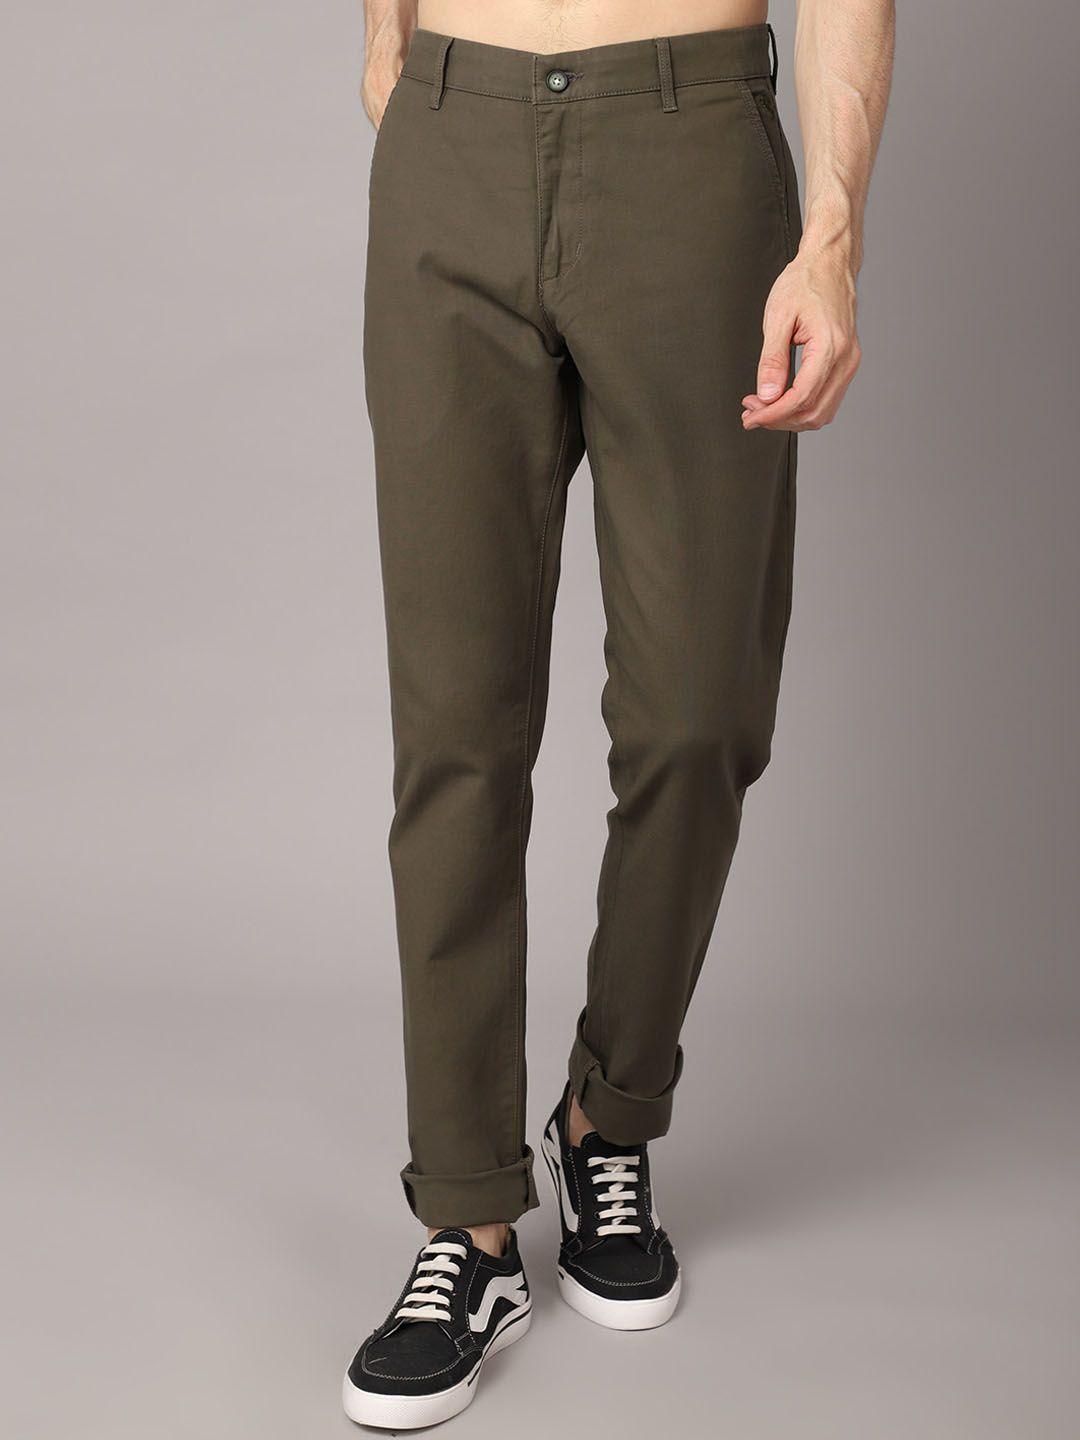 cantabil-men-flat-front-mid-rise-easy-wash-cotton-chinos-trousers